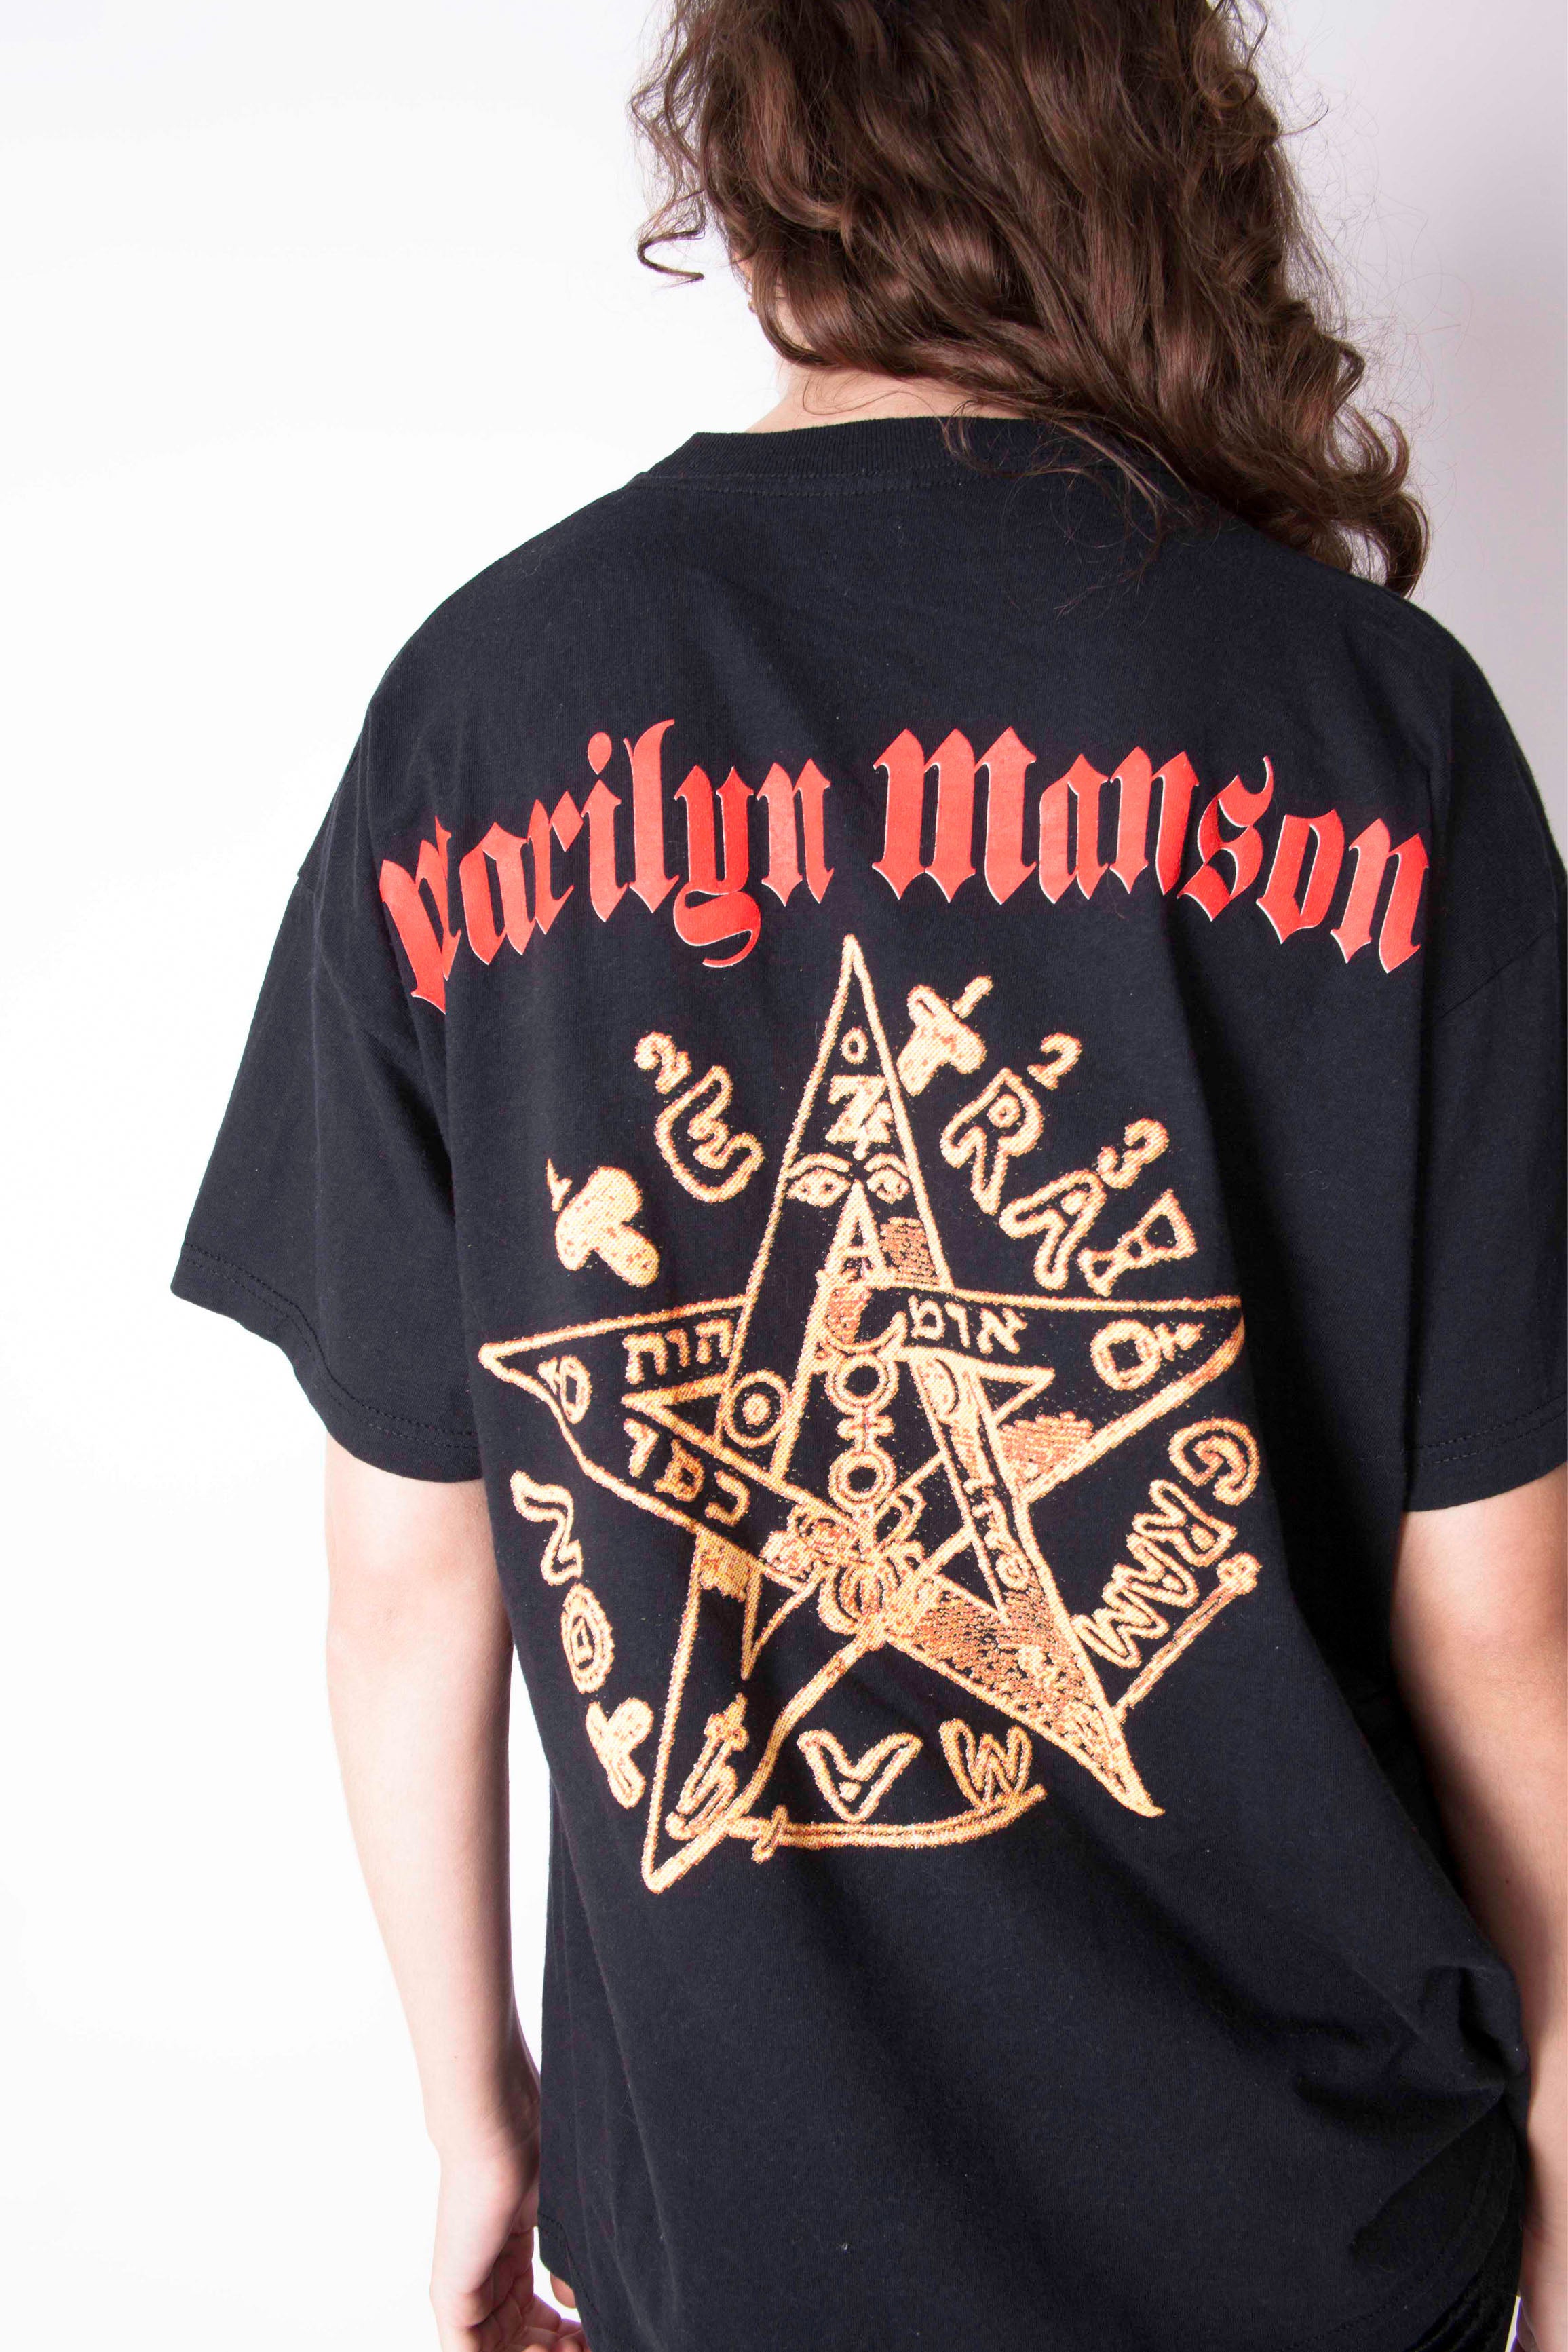 RARE Vintage 90s Marilyn Manson Band T-Shirt – Not Too Sweet